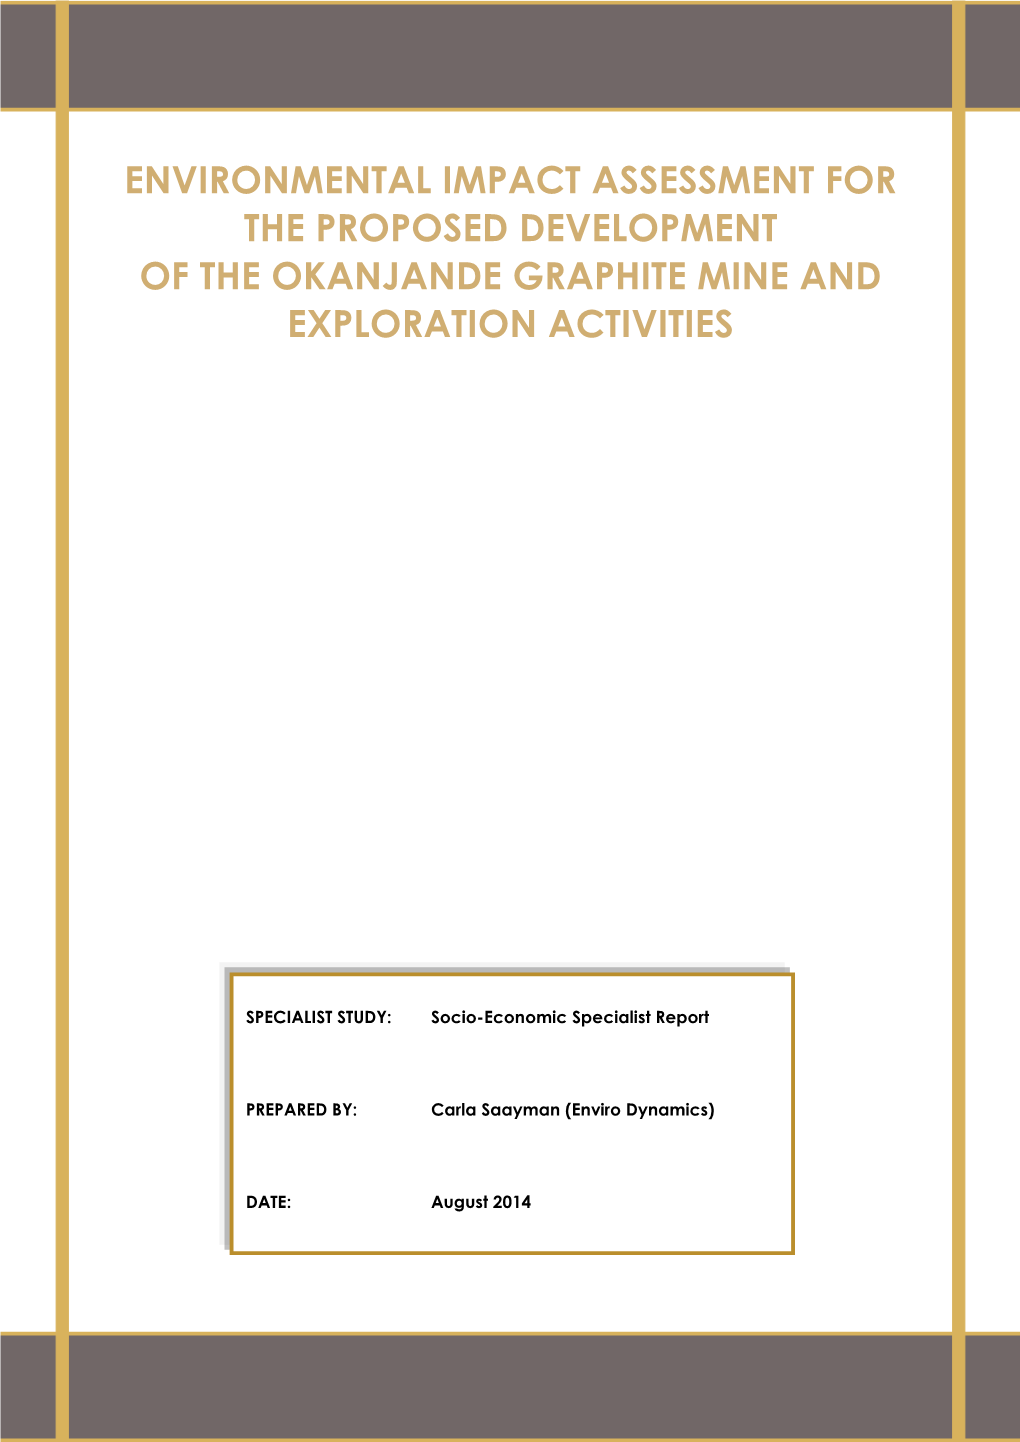 Environmental Impact Assessment for the Proposed Development of the Okanjande Graphite Mine and Exploration Activities